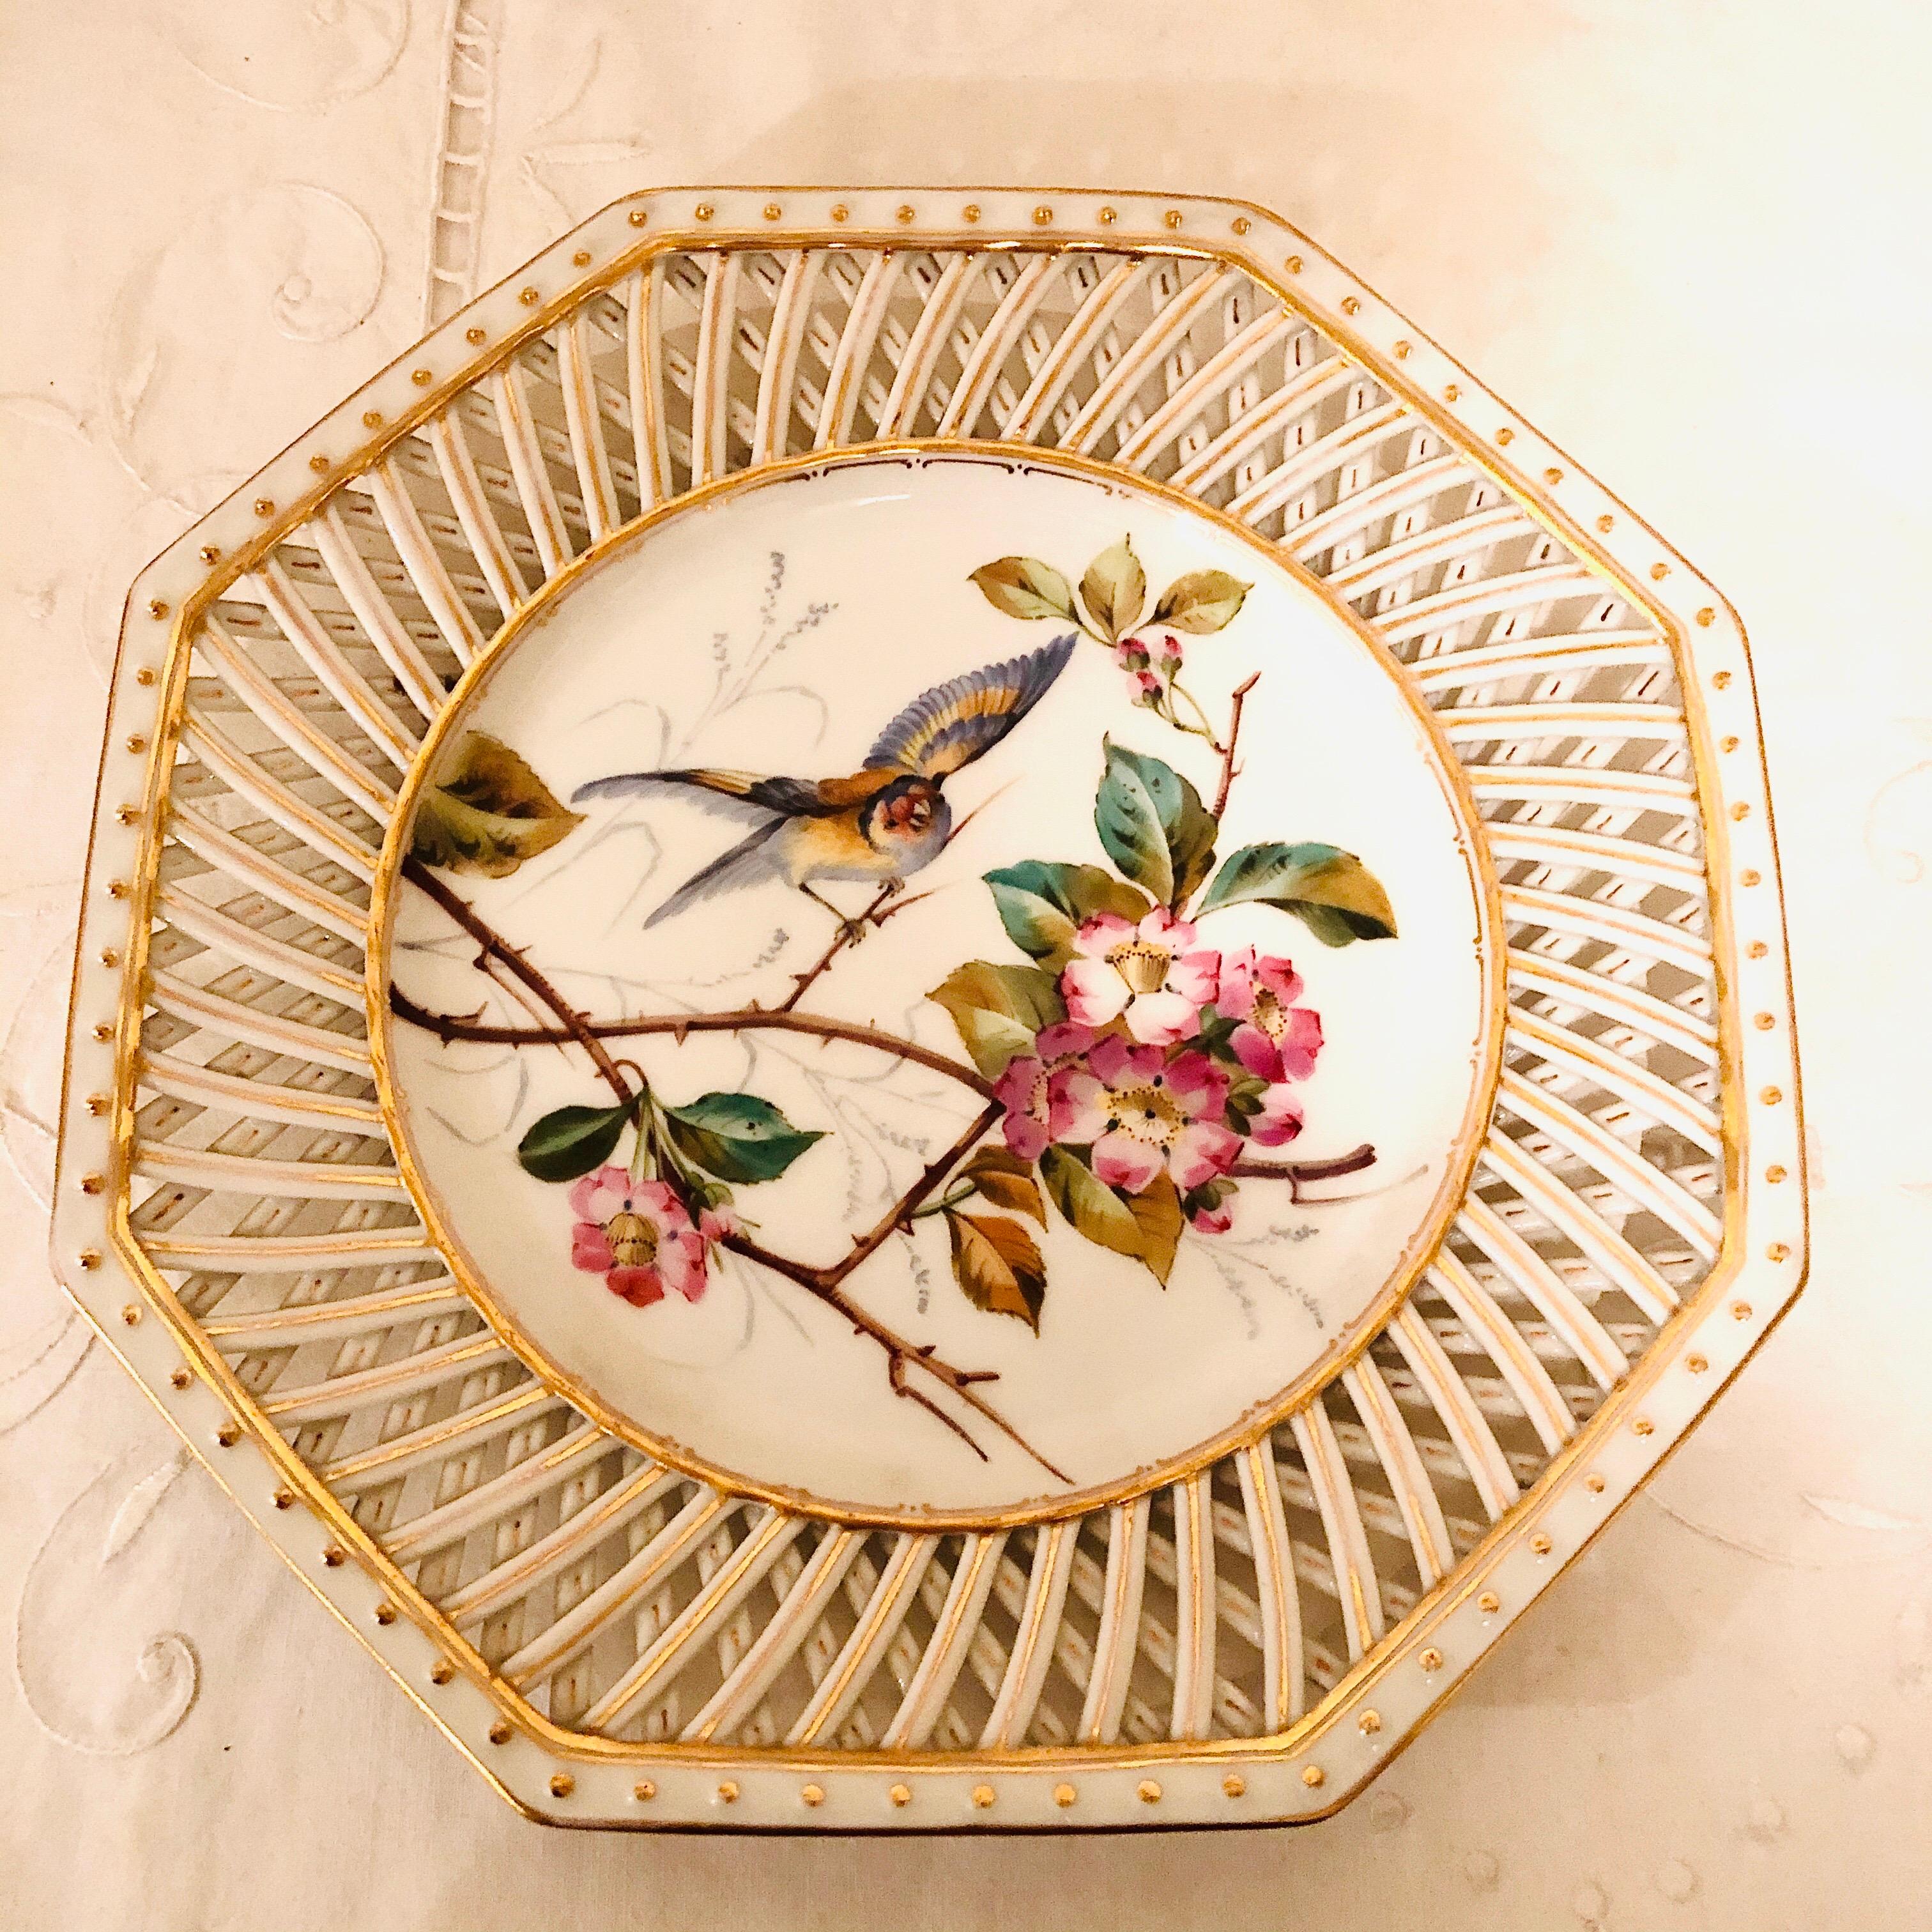 Late 19th Century Set of Twelve Pirkenhammer Reticulated Bird Plates Each Painted Differently